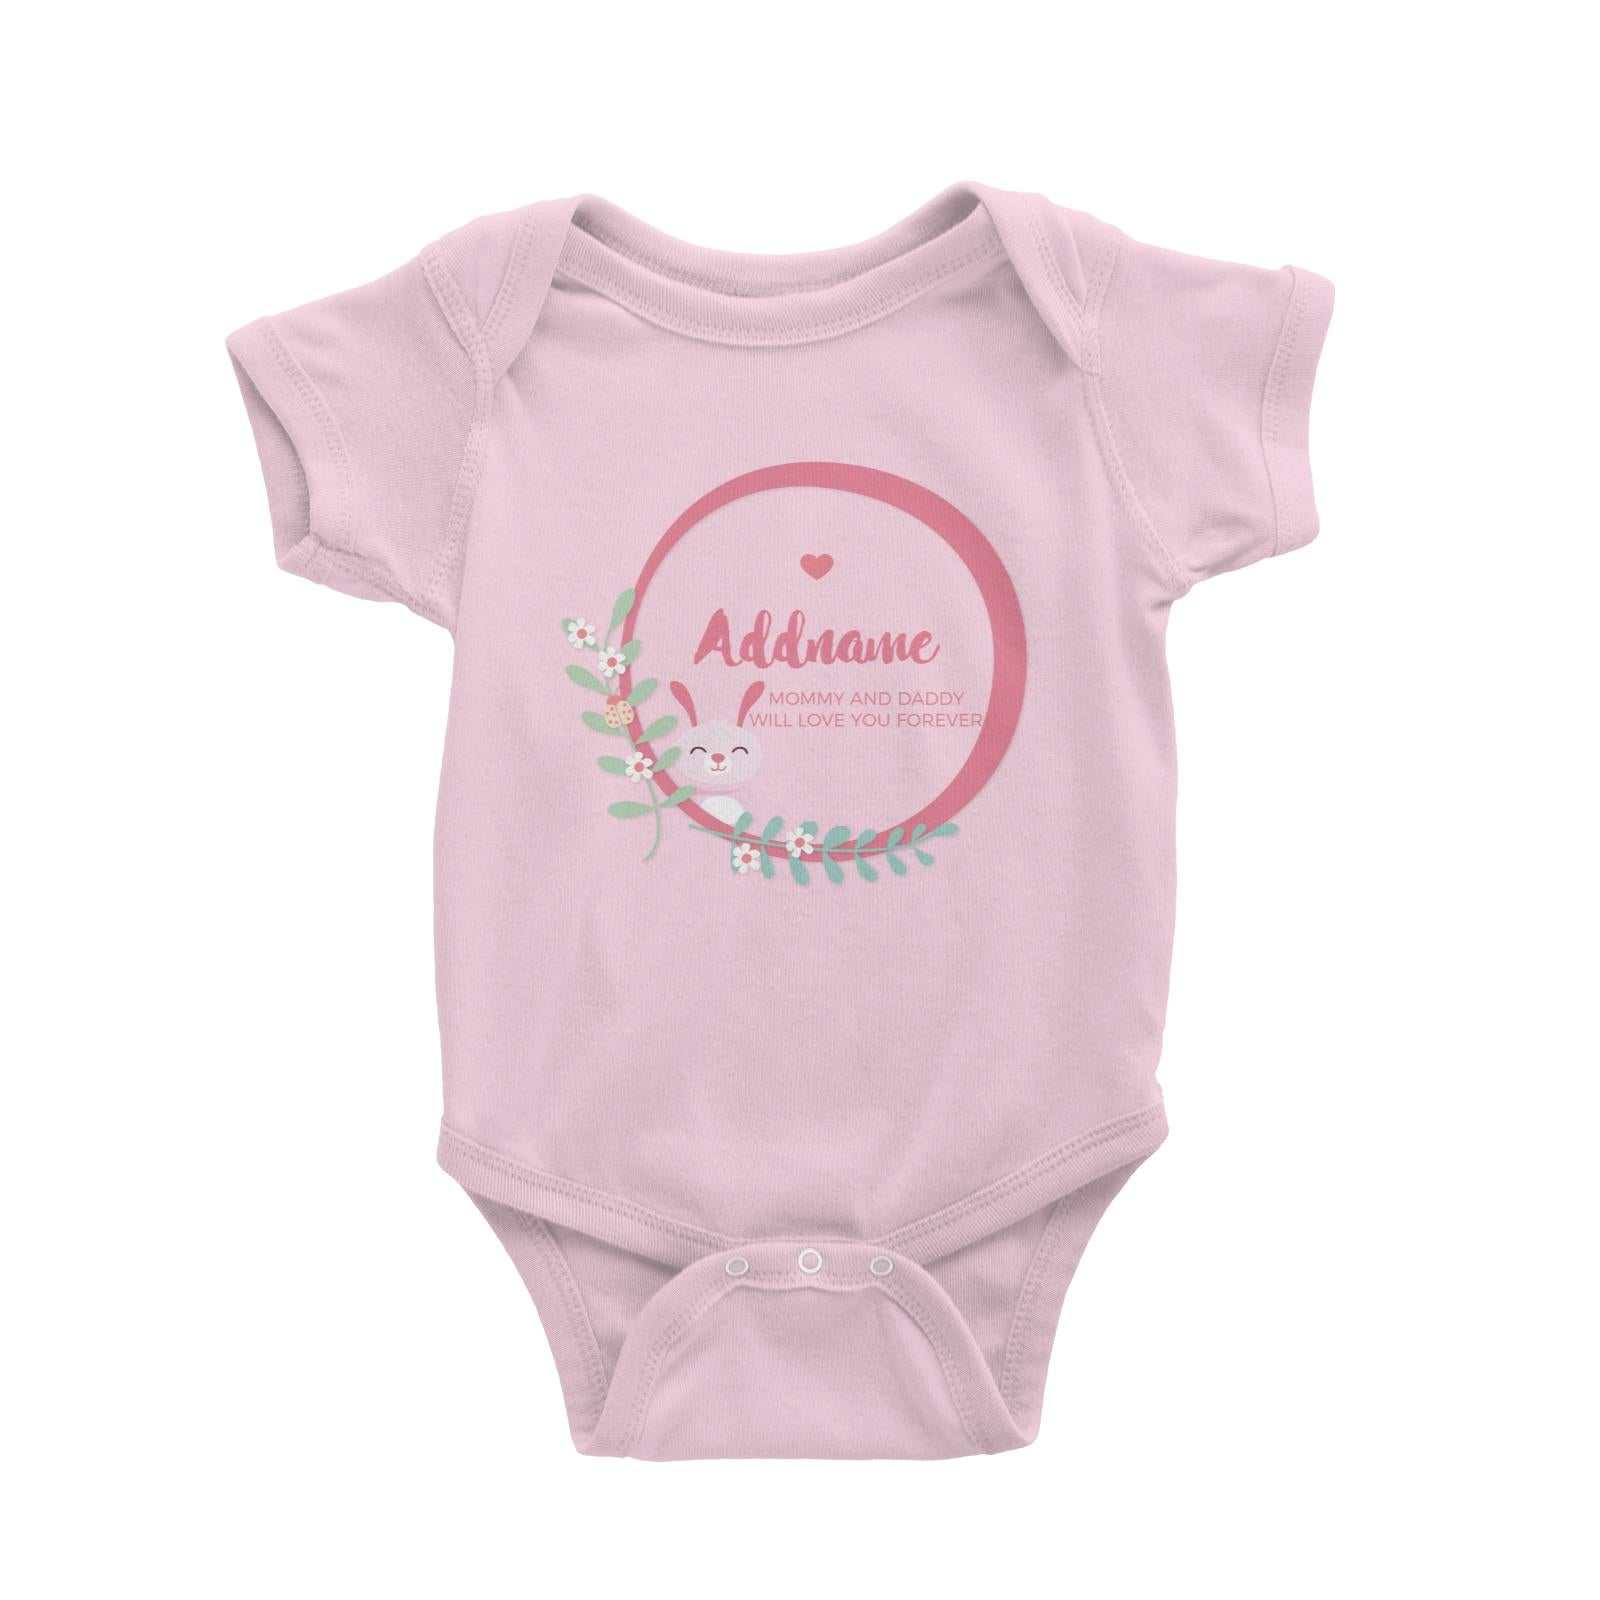 Cute Pink Rabbit in Pink Ring Personalizable with Name and Text Baby Romper